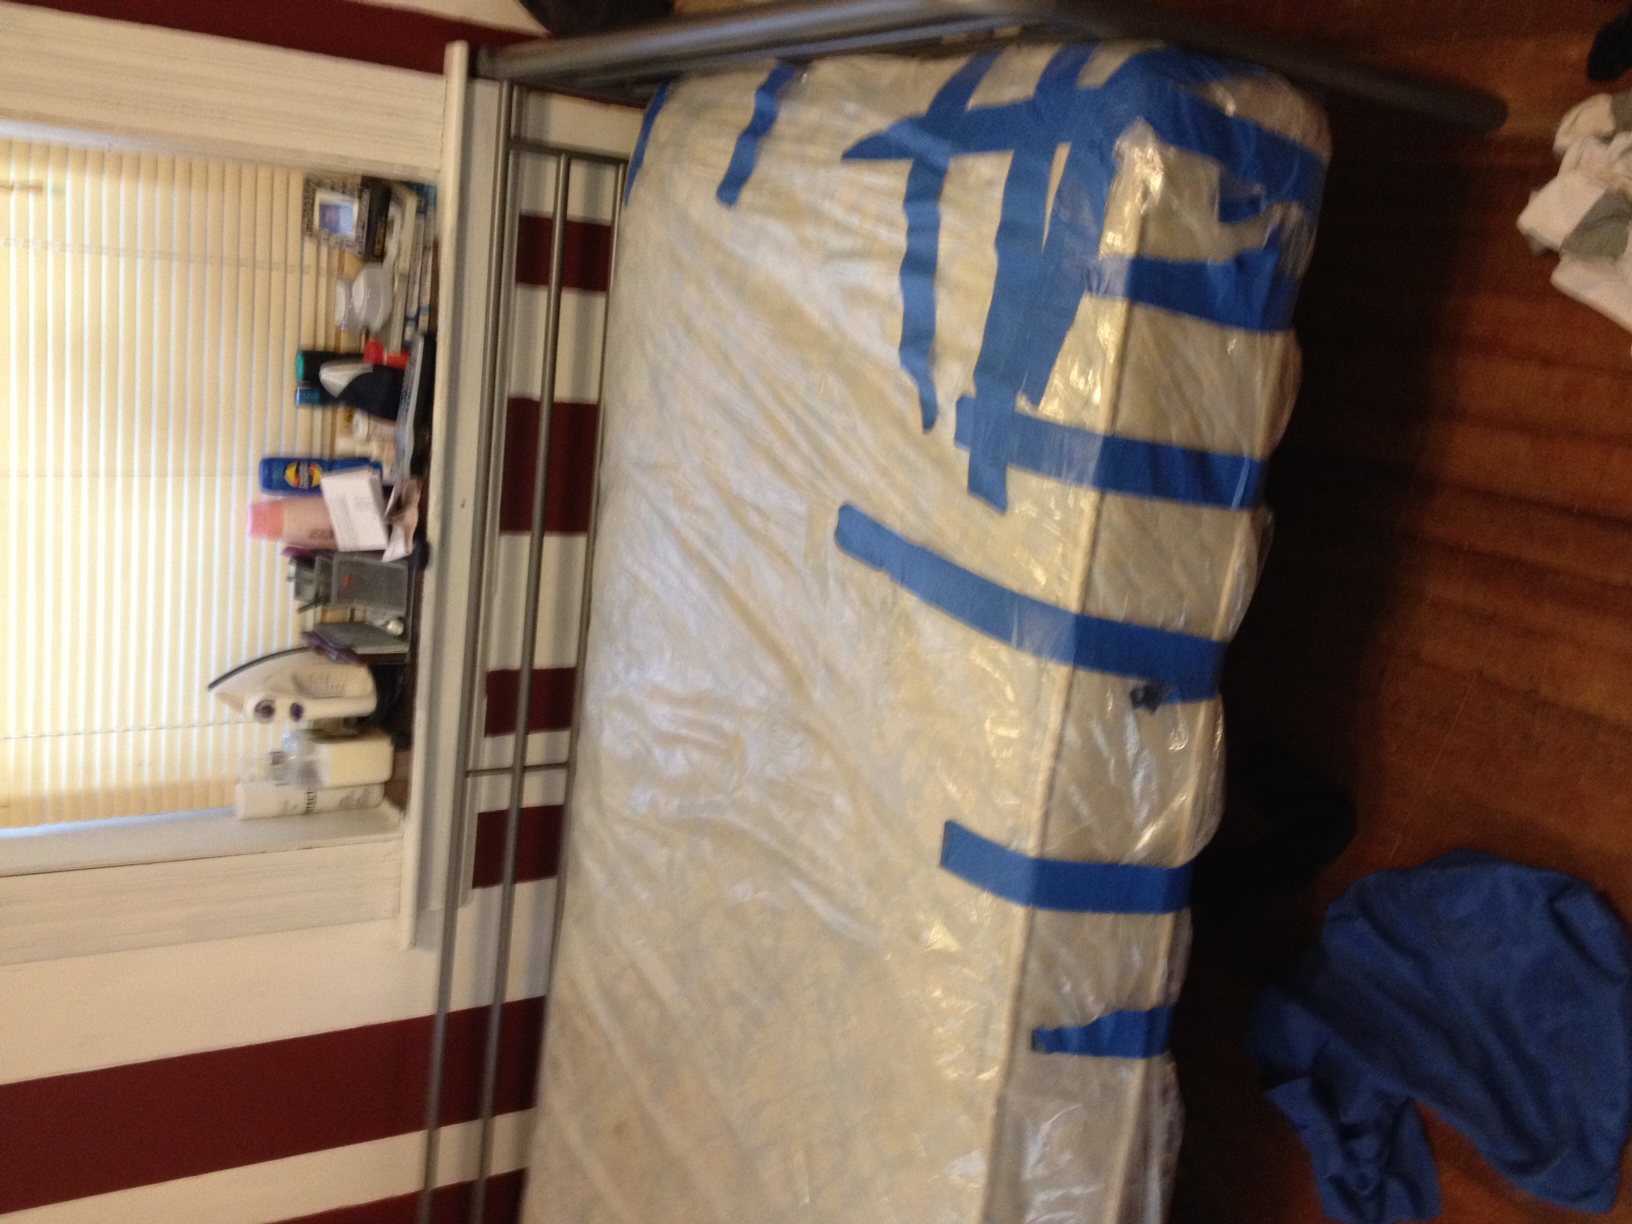 Bed Bug Mattress Covers: A Right Way And A Wrong Way ...